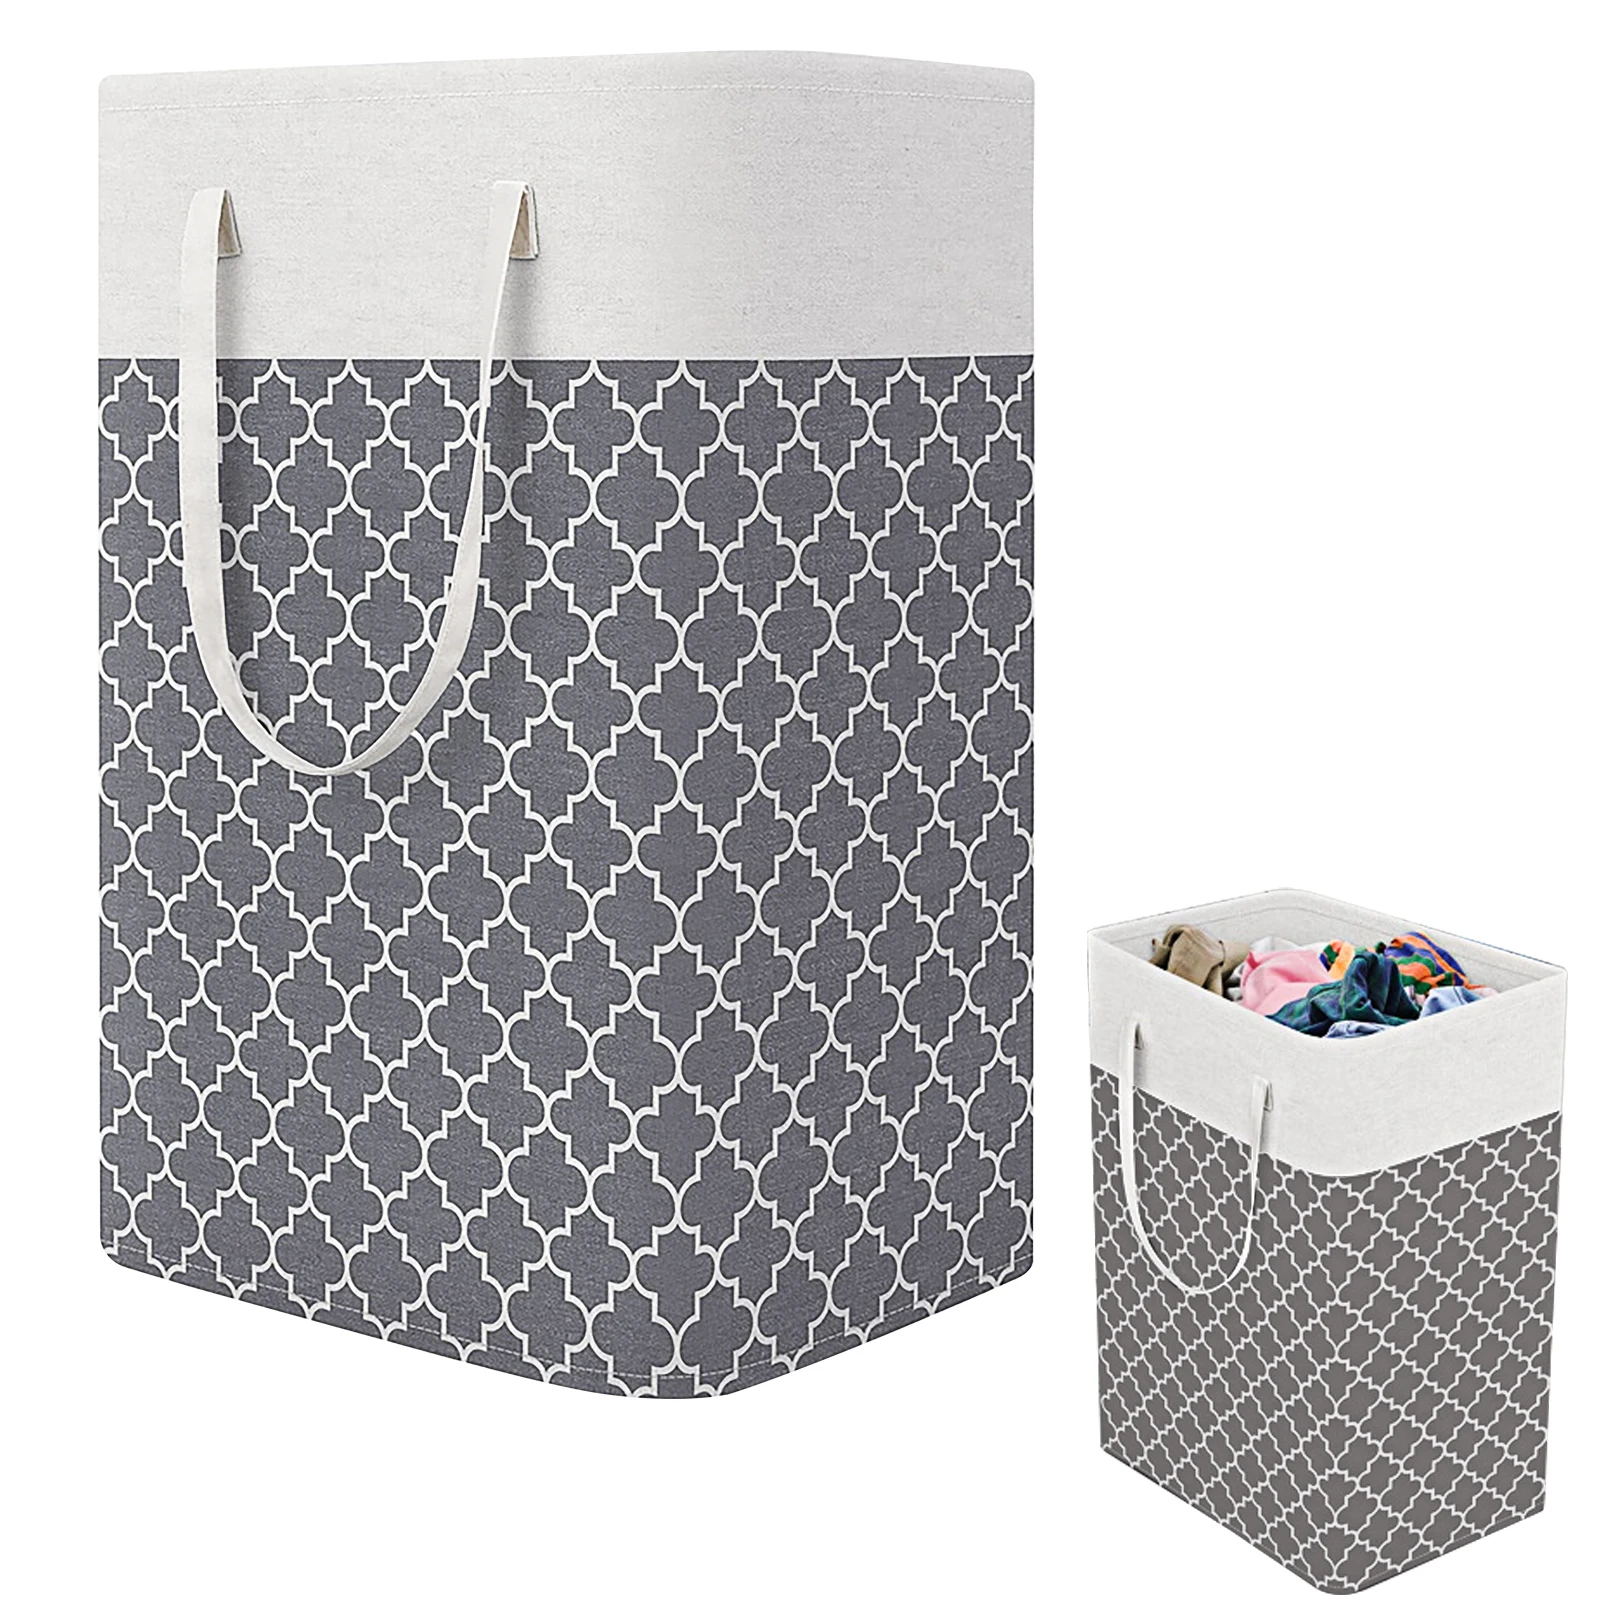 

Storing Clothes Basket Laundry Hamper Lantern Prints Easy Carry Waterproof With Handle Home Freestanding Collapsible Toys